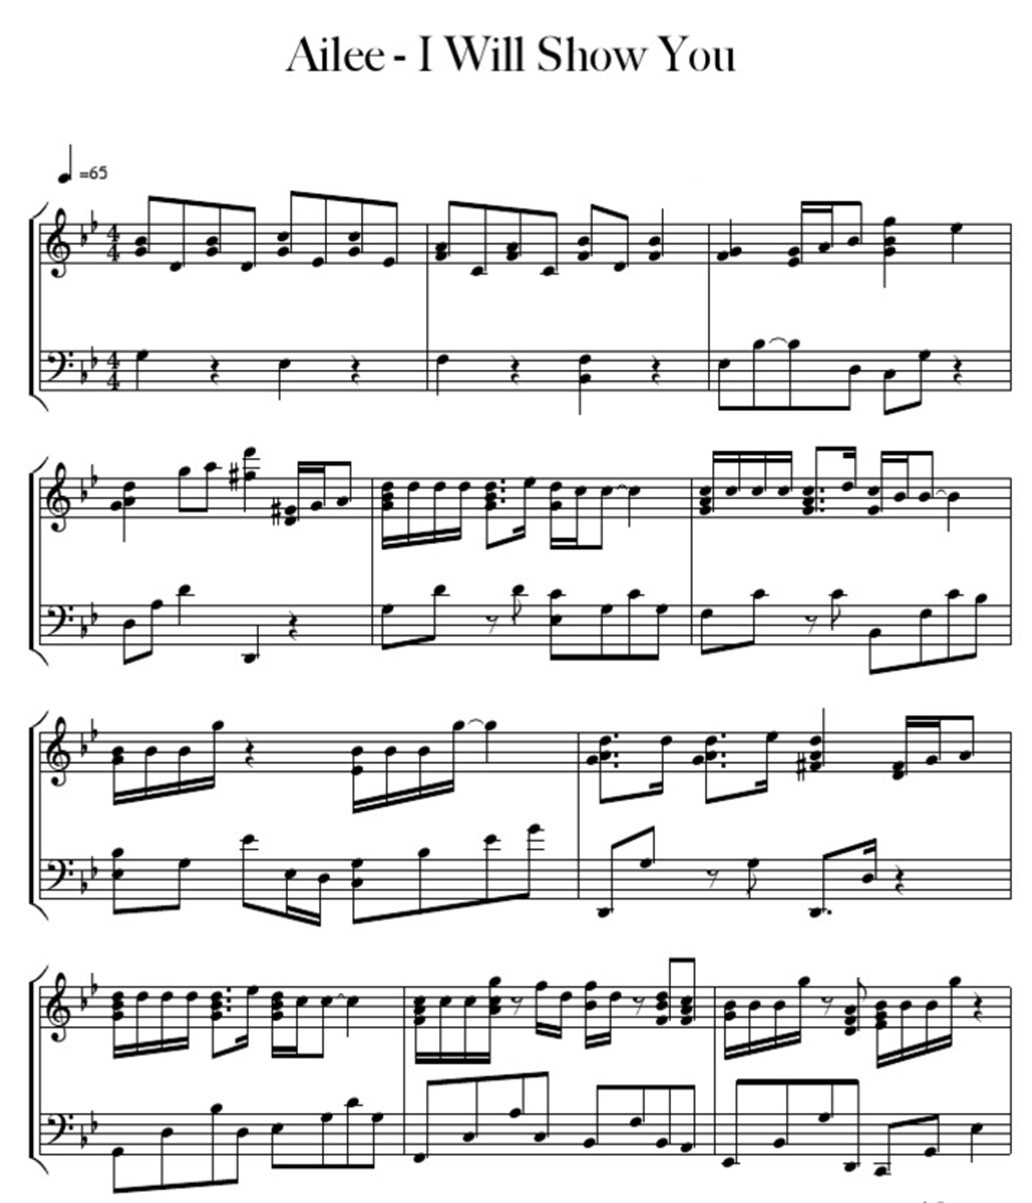 i will show you sheet music notes